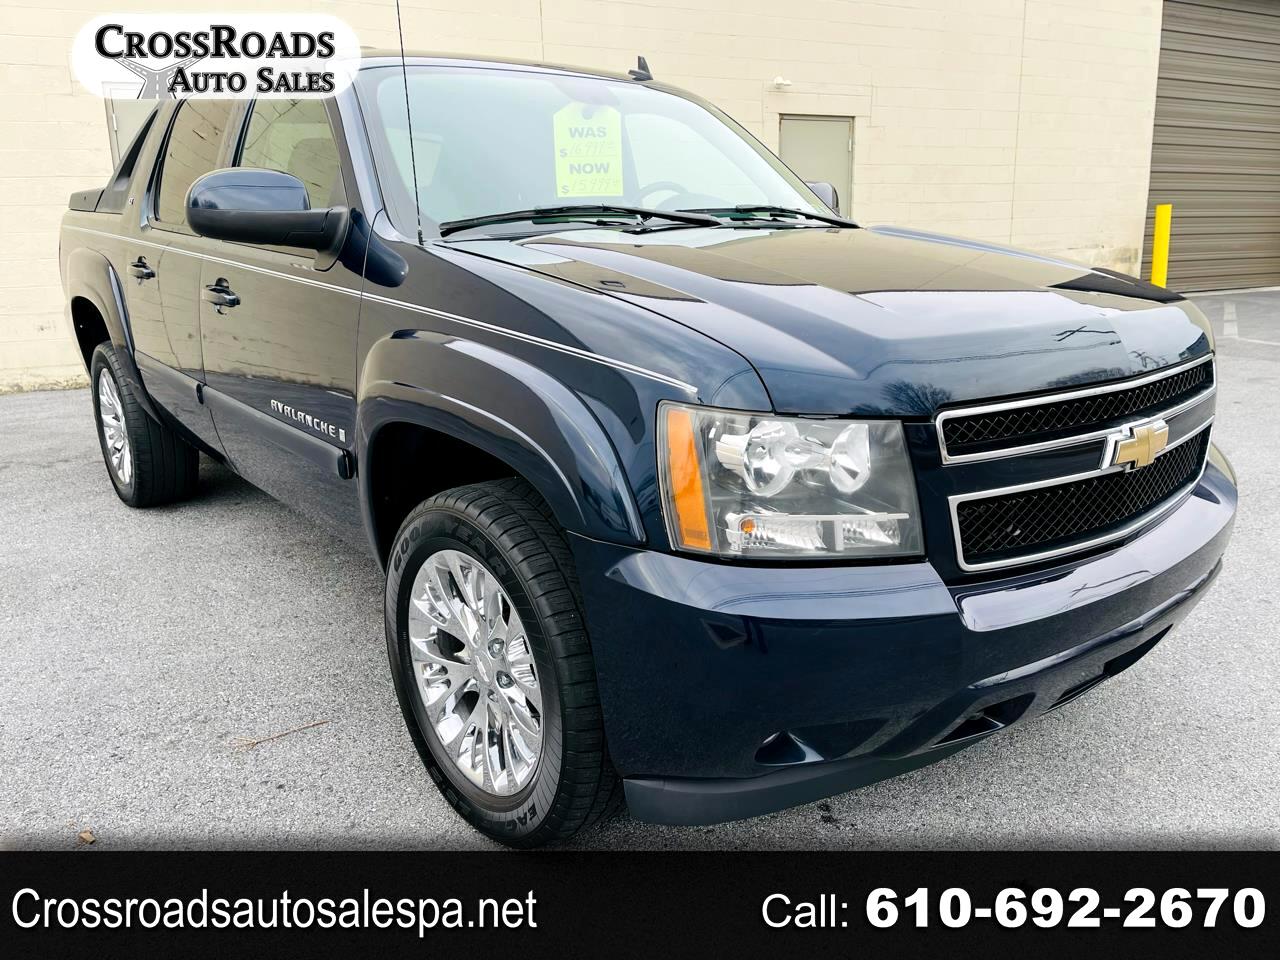 Chevrolet Avalanche LT1 4WD 2008